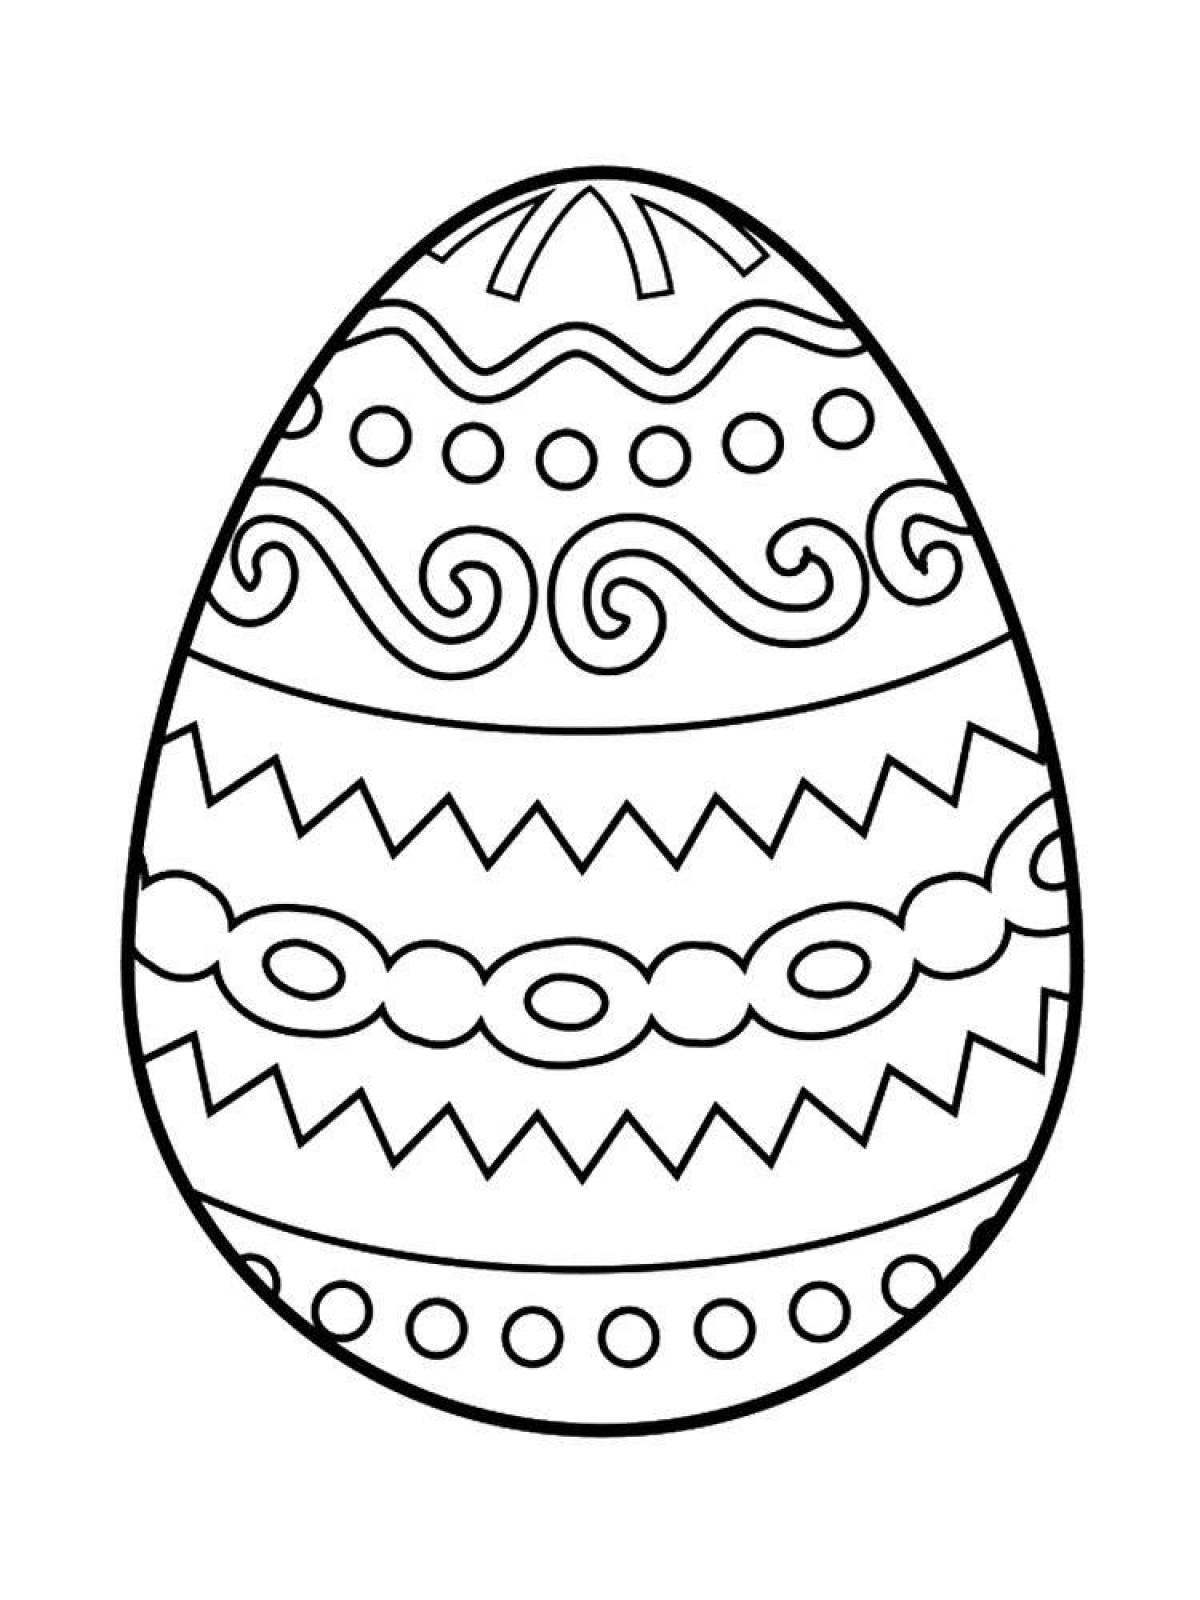 Intricate egg coloring